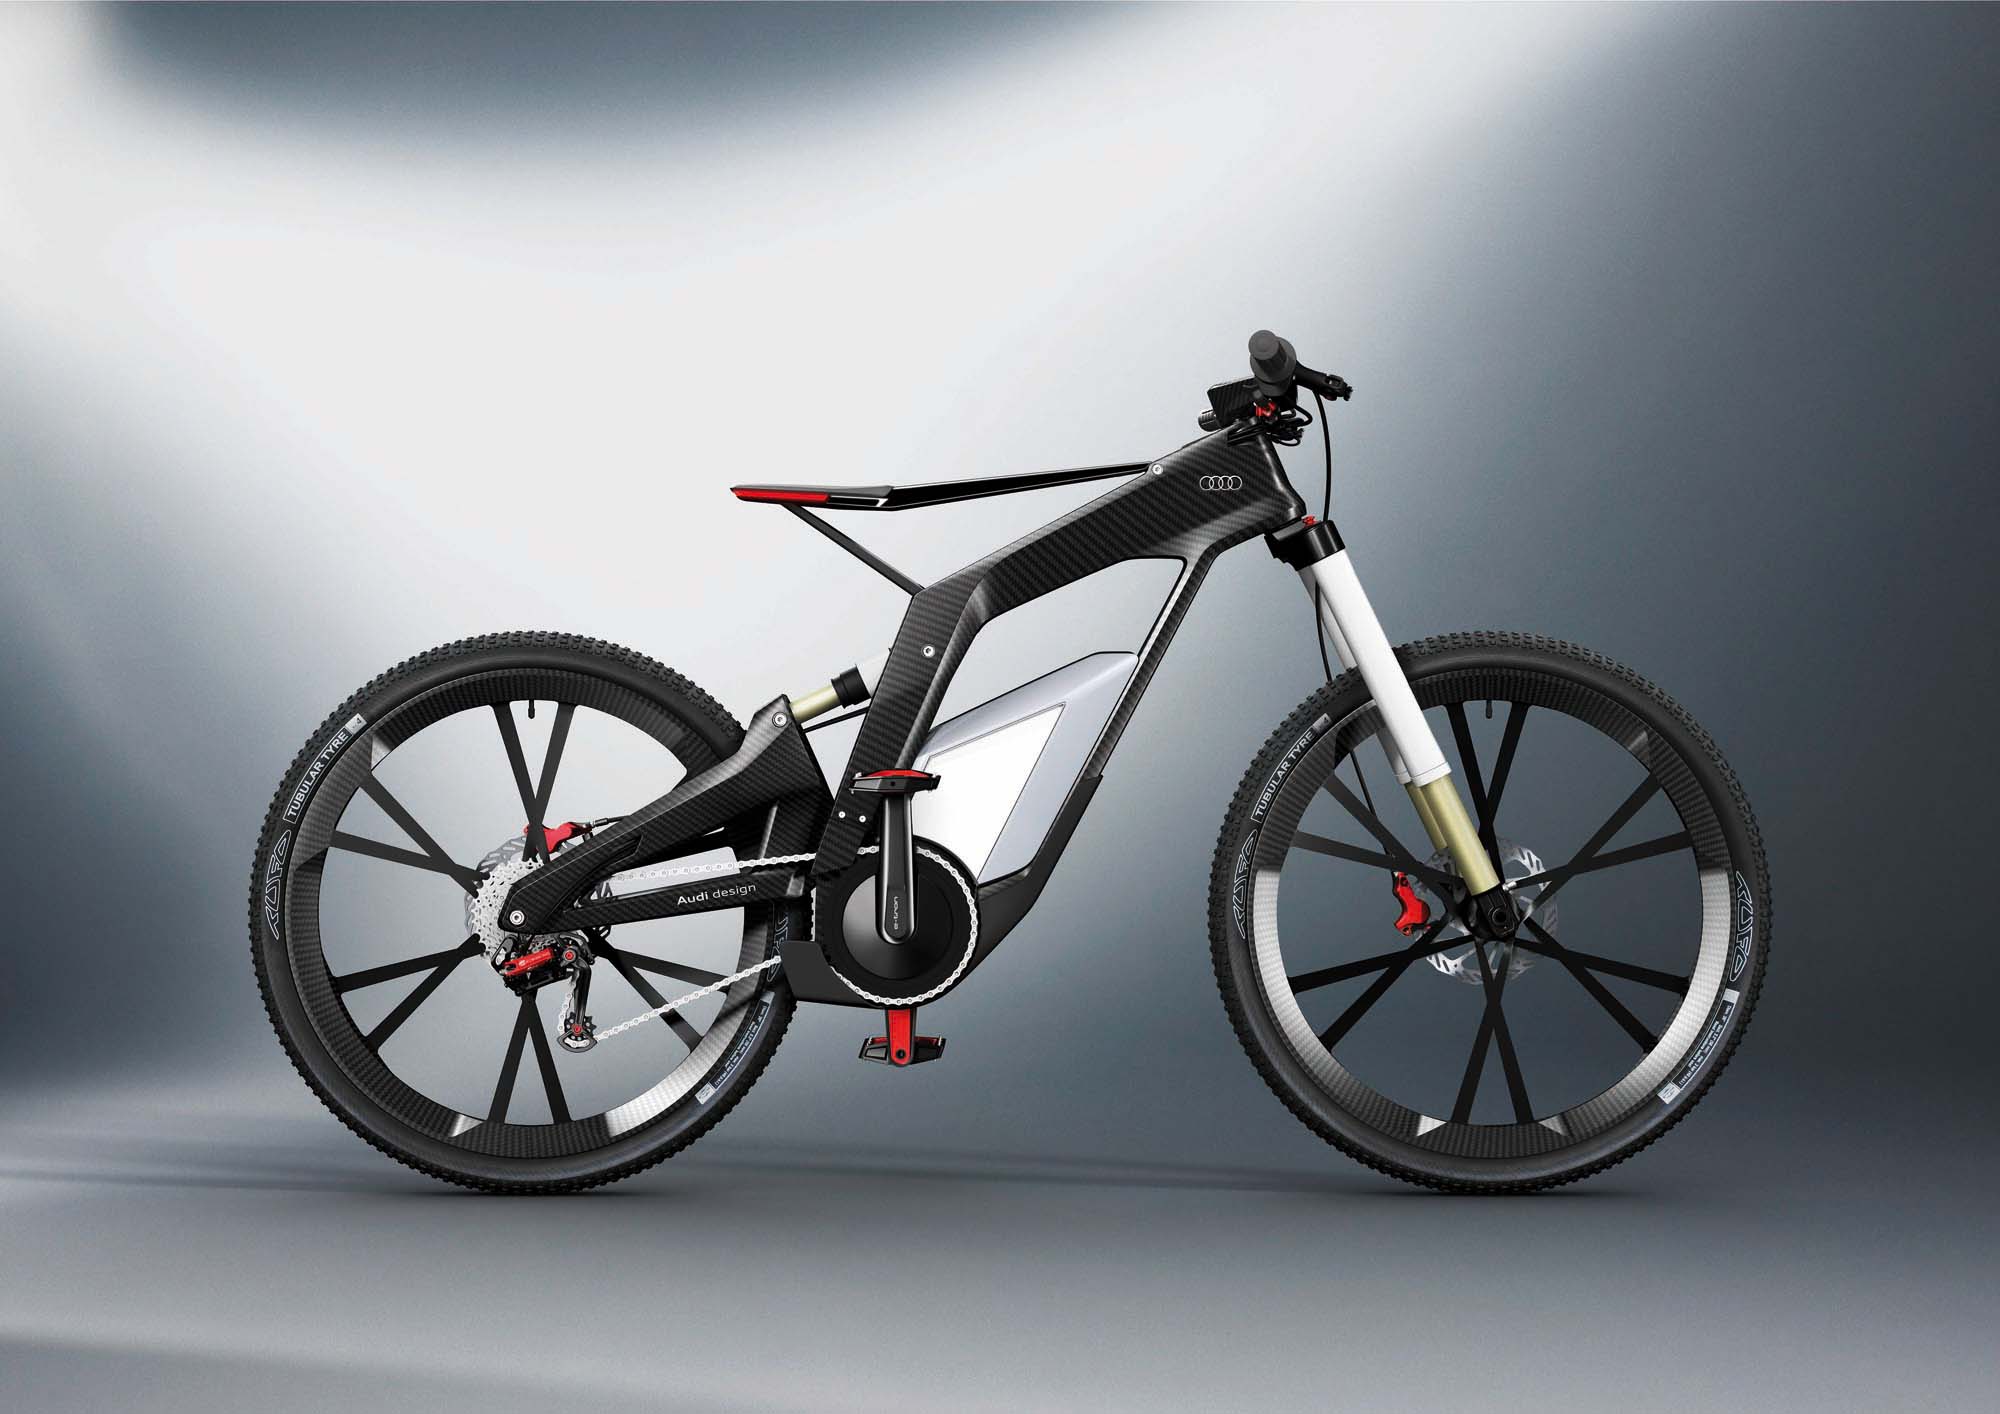 Audi Ebike Electric Bike Hd Wallpapers ~ Hd Car Wallpapers - World Most Expensive Cycle - HD Wallpaper 